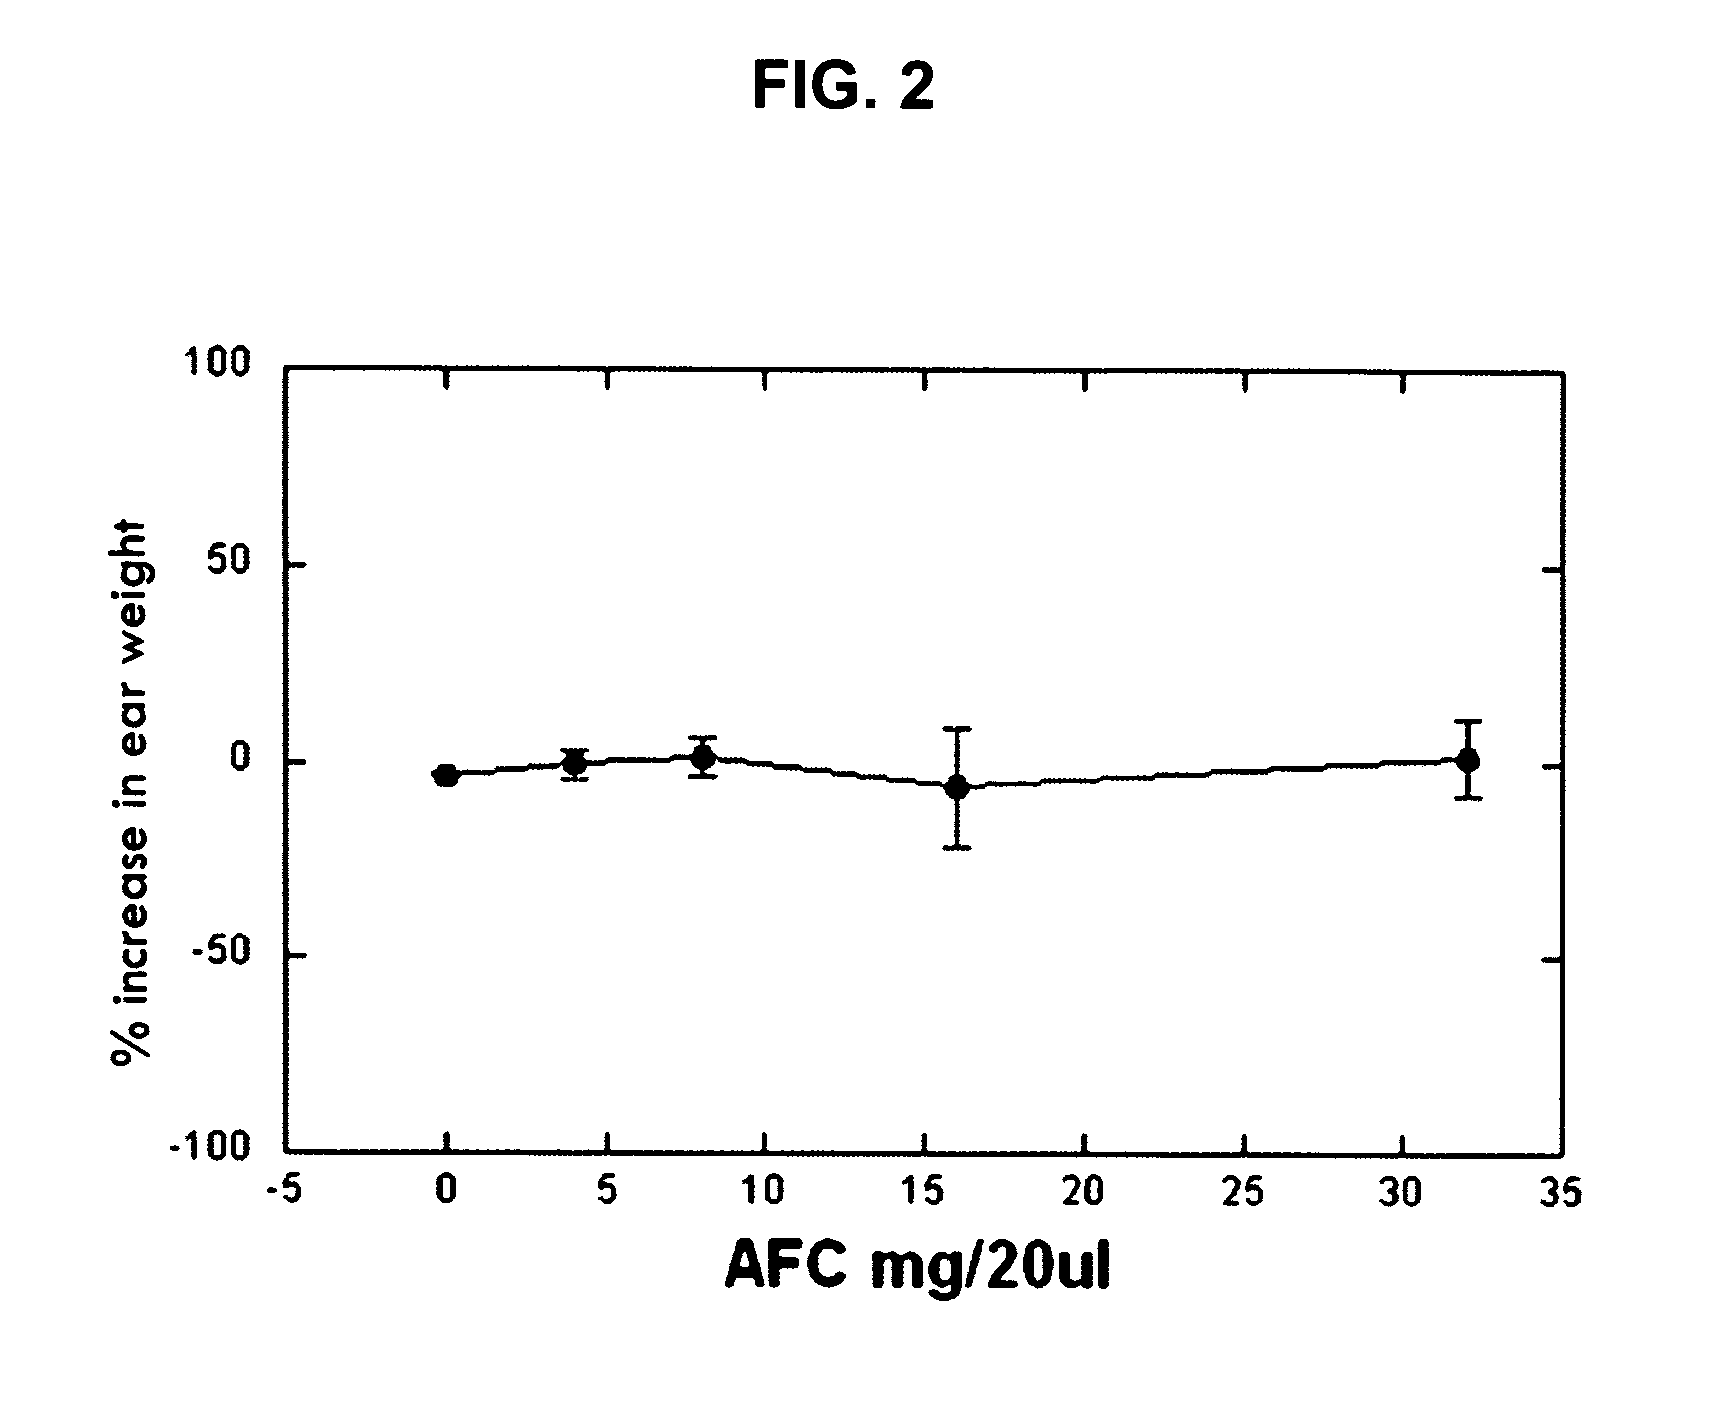 Topical compositions and methods for epithelial-related conditions